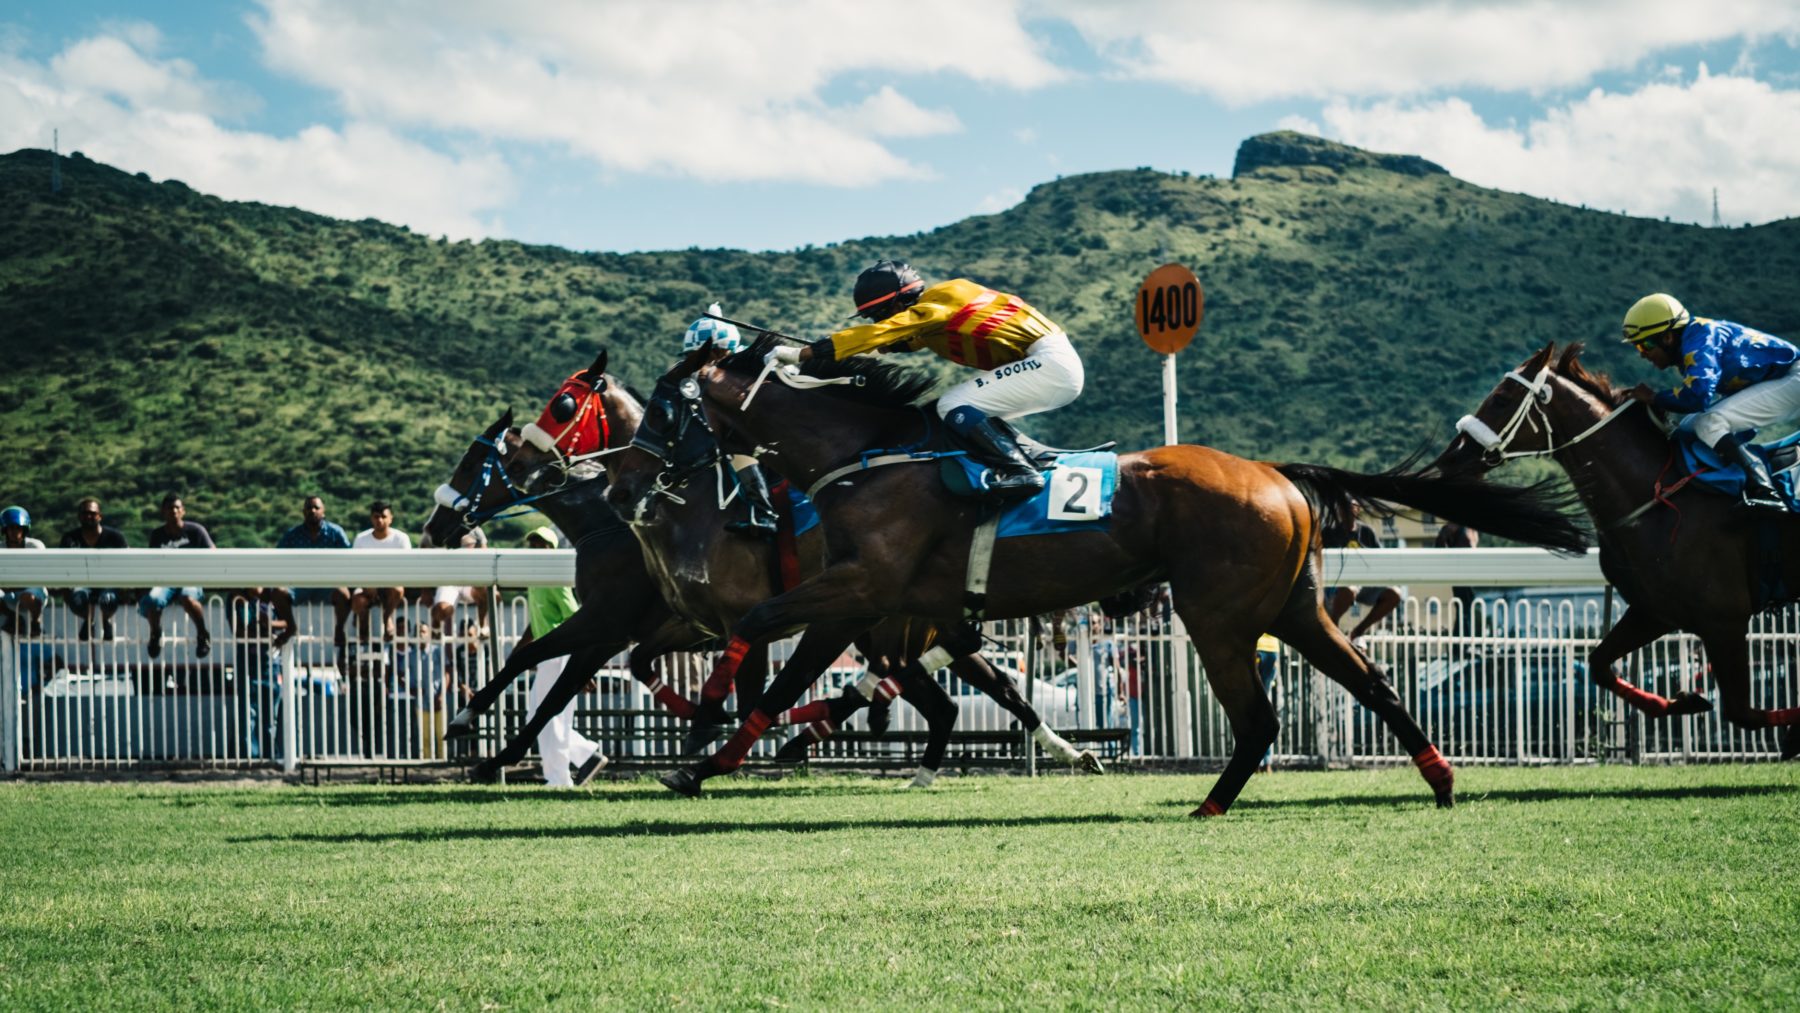 First day of the horse racing season at Champ de Mars (Mauritius).